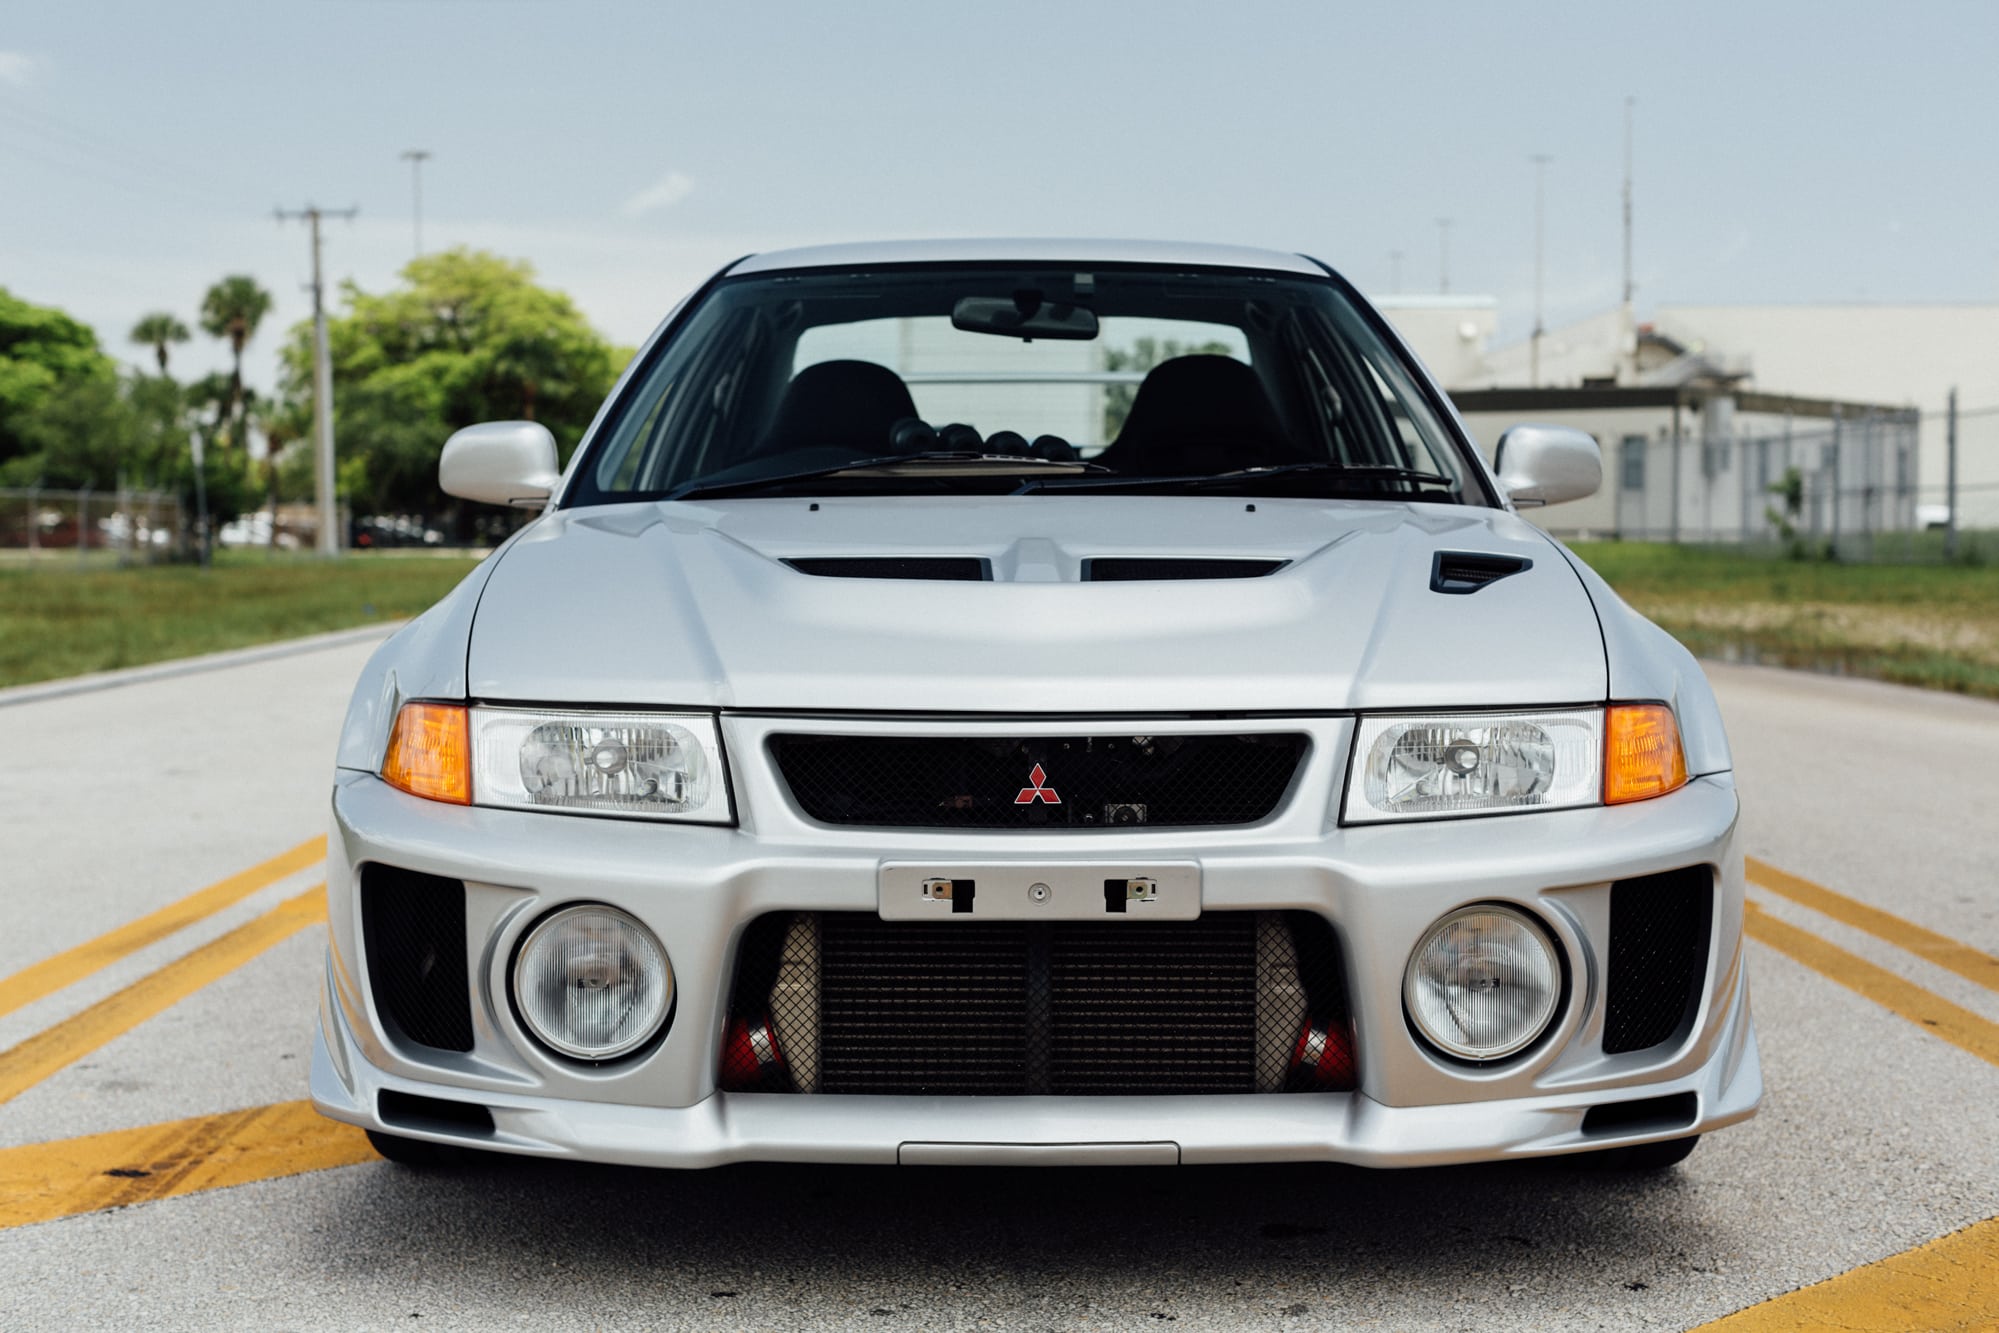 1998 Mitsubishi Lancer Evolution V GSR (CP9A)| 1 of 1,903 | ORIGINAL PAINT! | Mint Condition | Extremely Dialed-in Suspension Setup | Blitz ZZR Coilovers | Cusco Bits | Michelin Sport Cup 2 | Boost Up | Ralliart Exhaust | Gruppe M Intake | OEM++